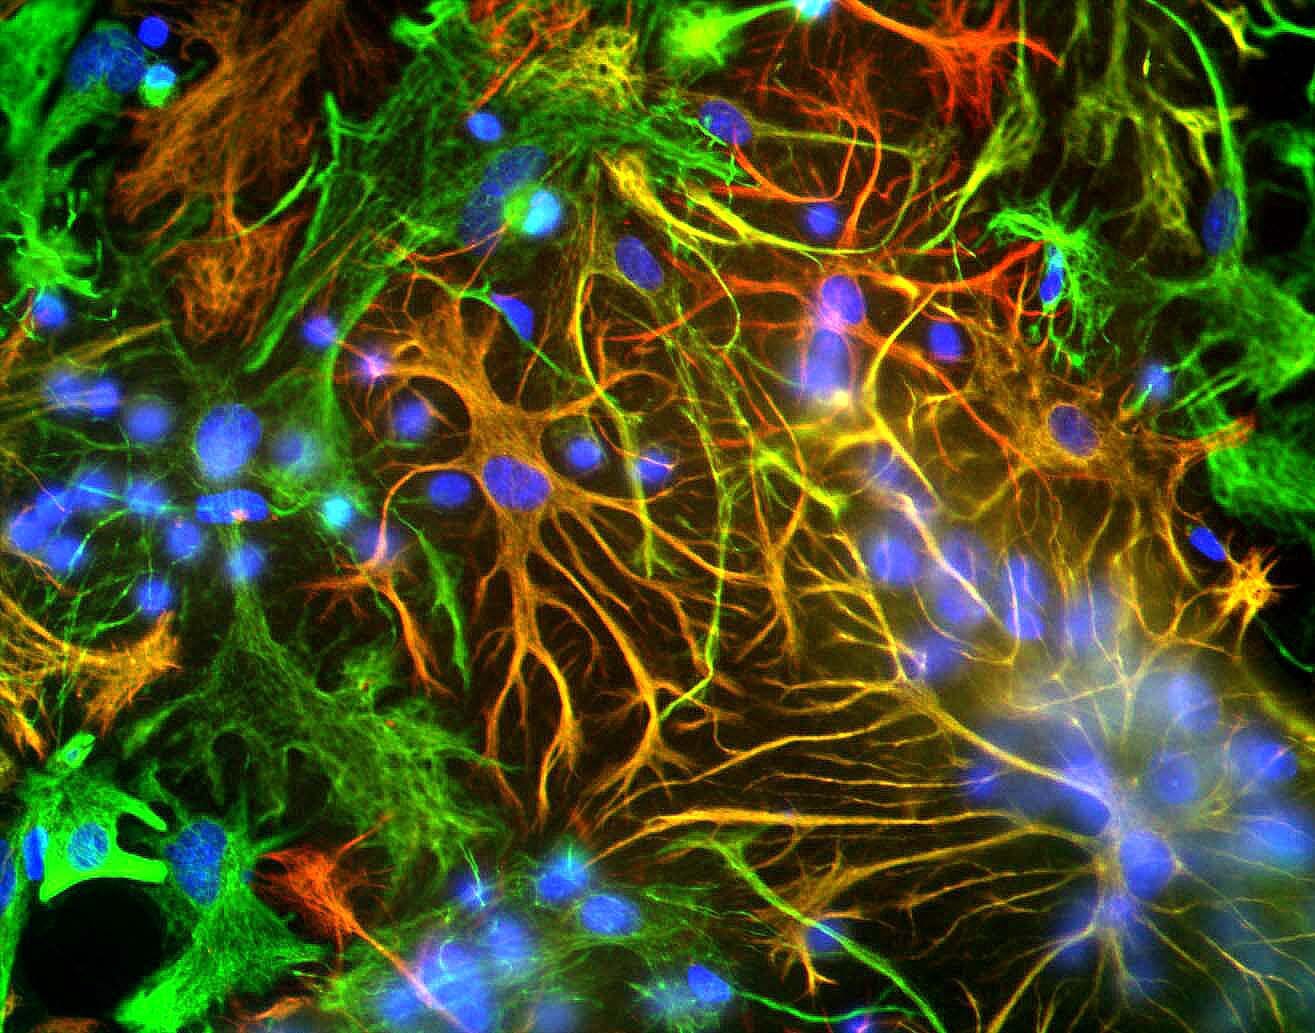 Mixed neuron-glial cultures stained with Anti-GFAP Antibody (red) and Anti-Vimentin Antibody (A85421 | green). The fibroblastic cells contain only vimentin and so are green, while astrocytes contain either vimentin and GFAP, so appear golden, or predominantly GFAP, in which case they appear red. Blue is nuclear DNA stain.